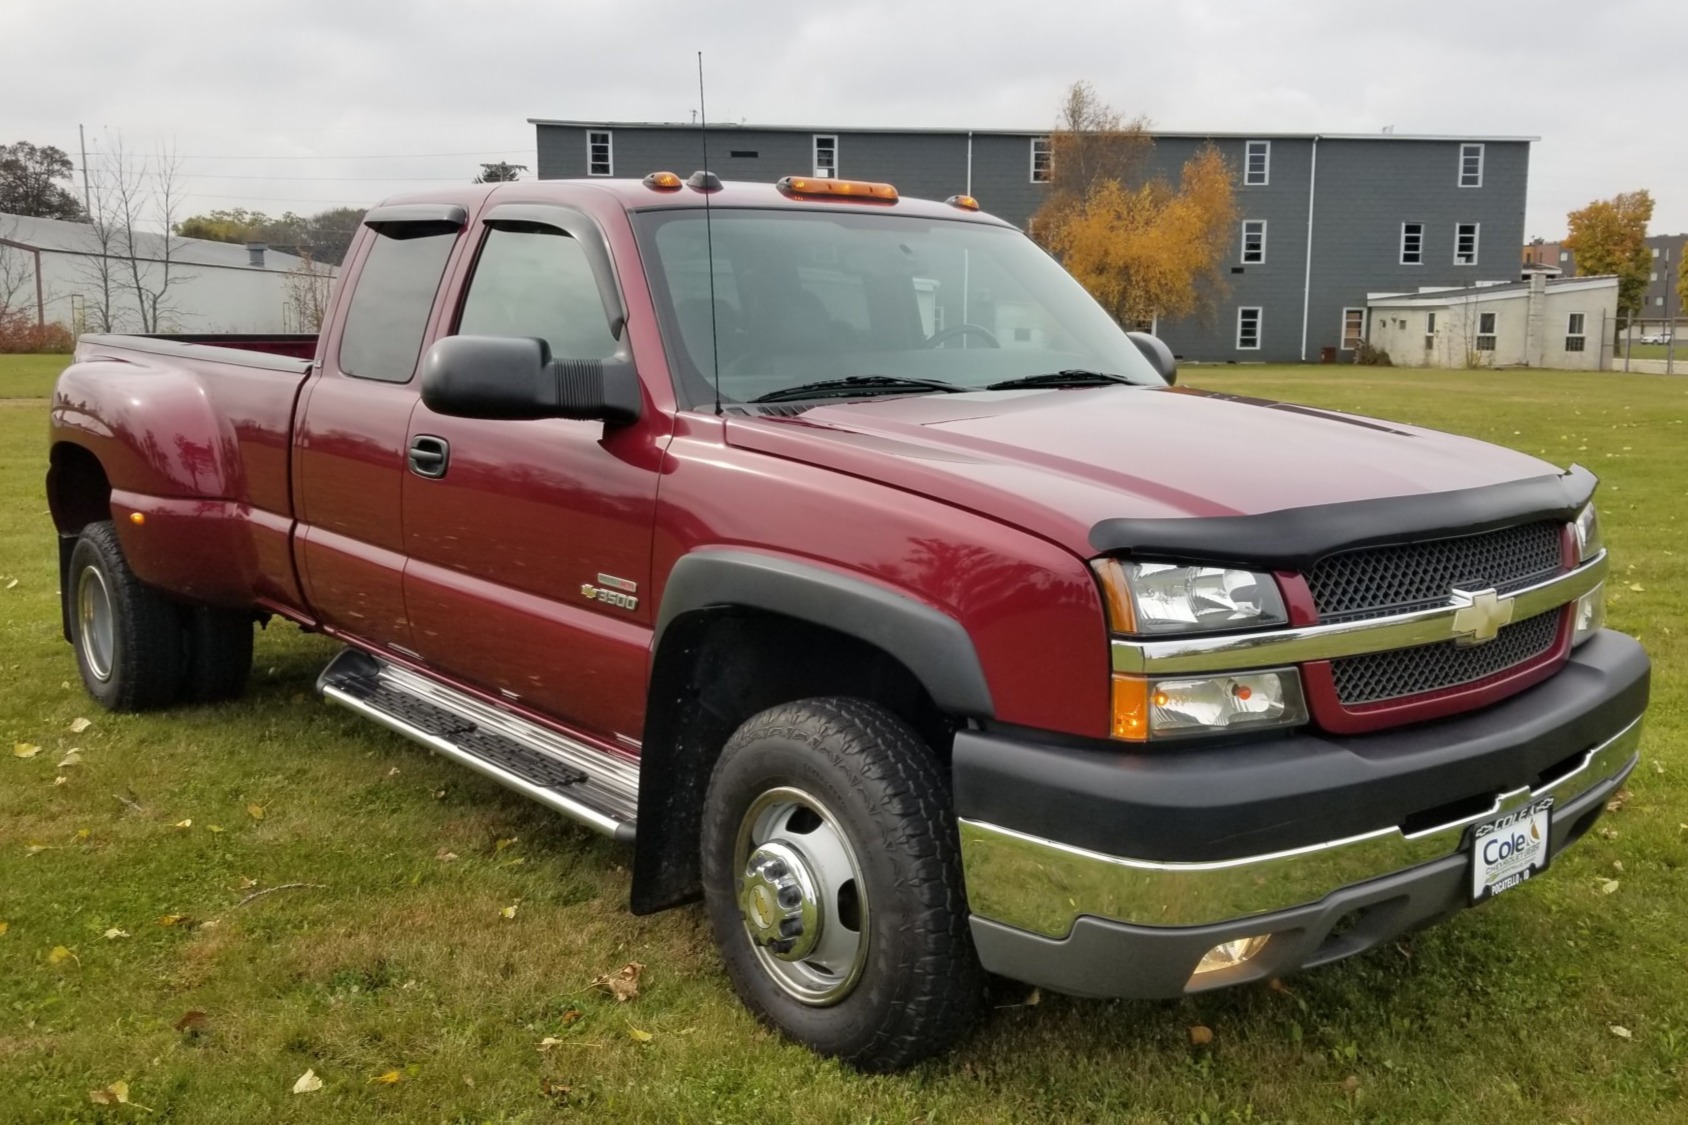 2004.5 Chevrolet Silverado 3500 Diesel 4x4 6-Speed for sale on BaT Auctions  - closed on December 20, 2019 (Lot #26,374) | Bring a Trailer